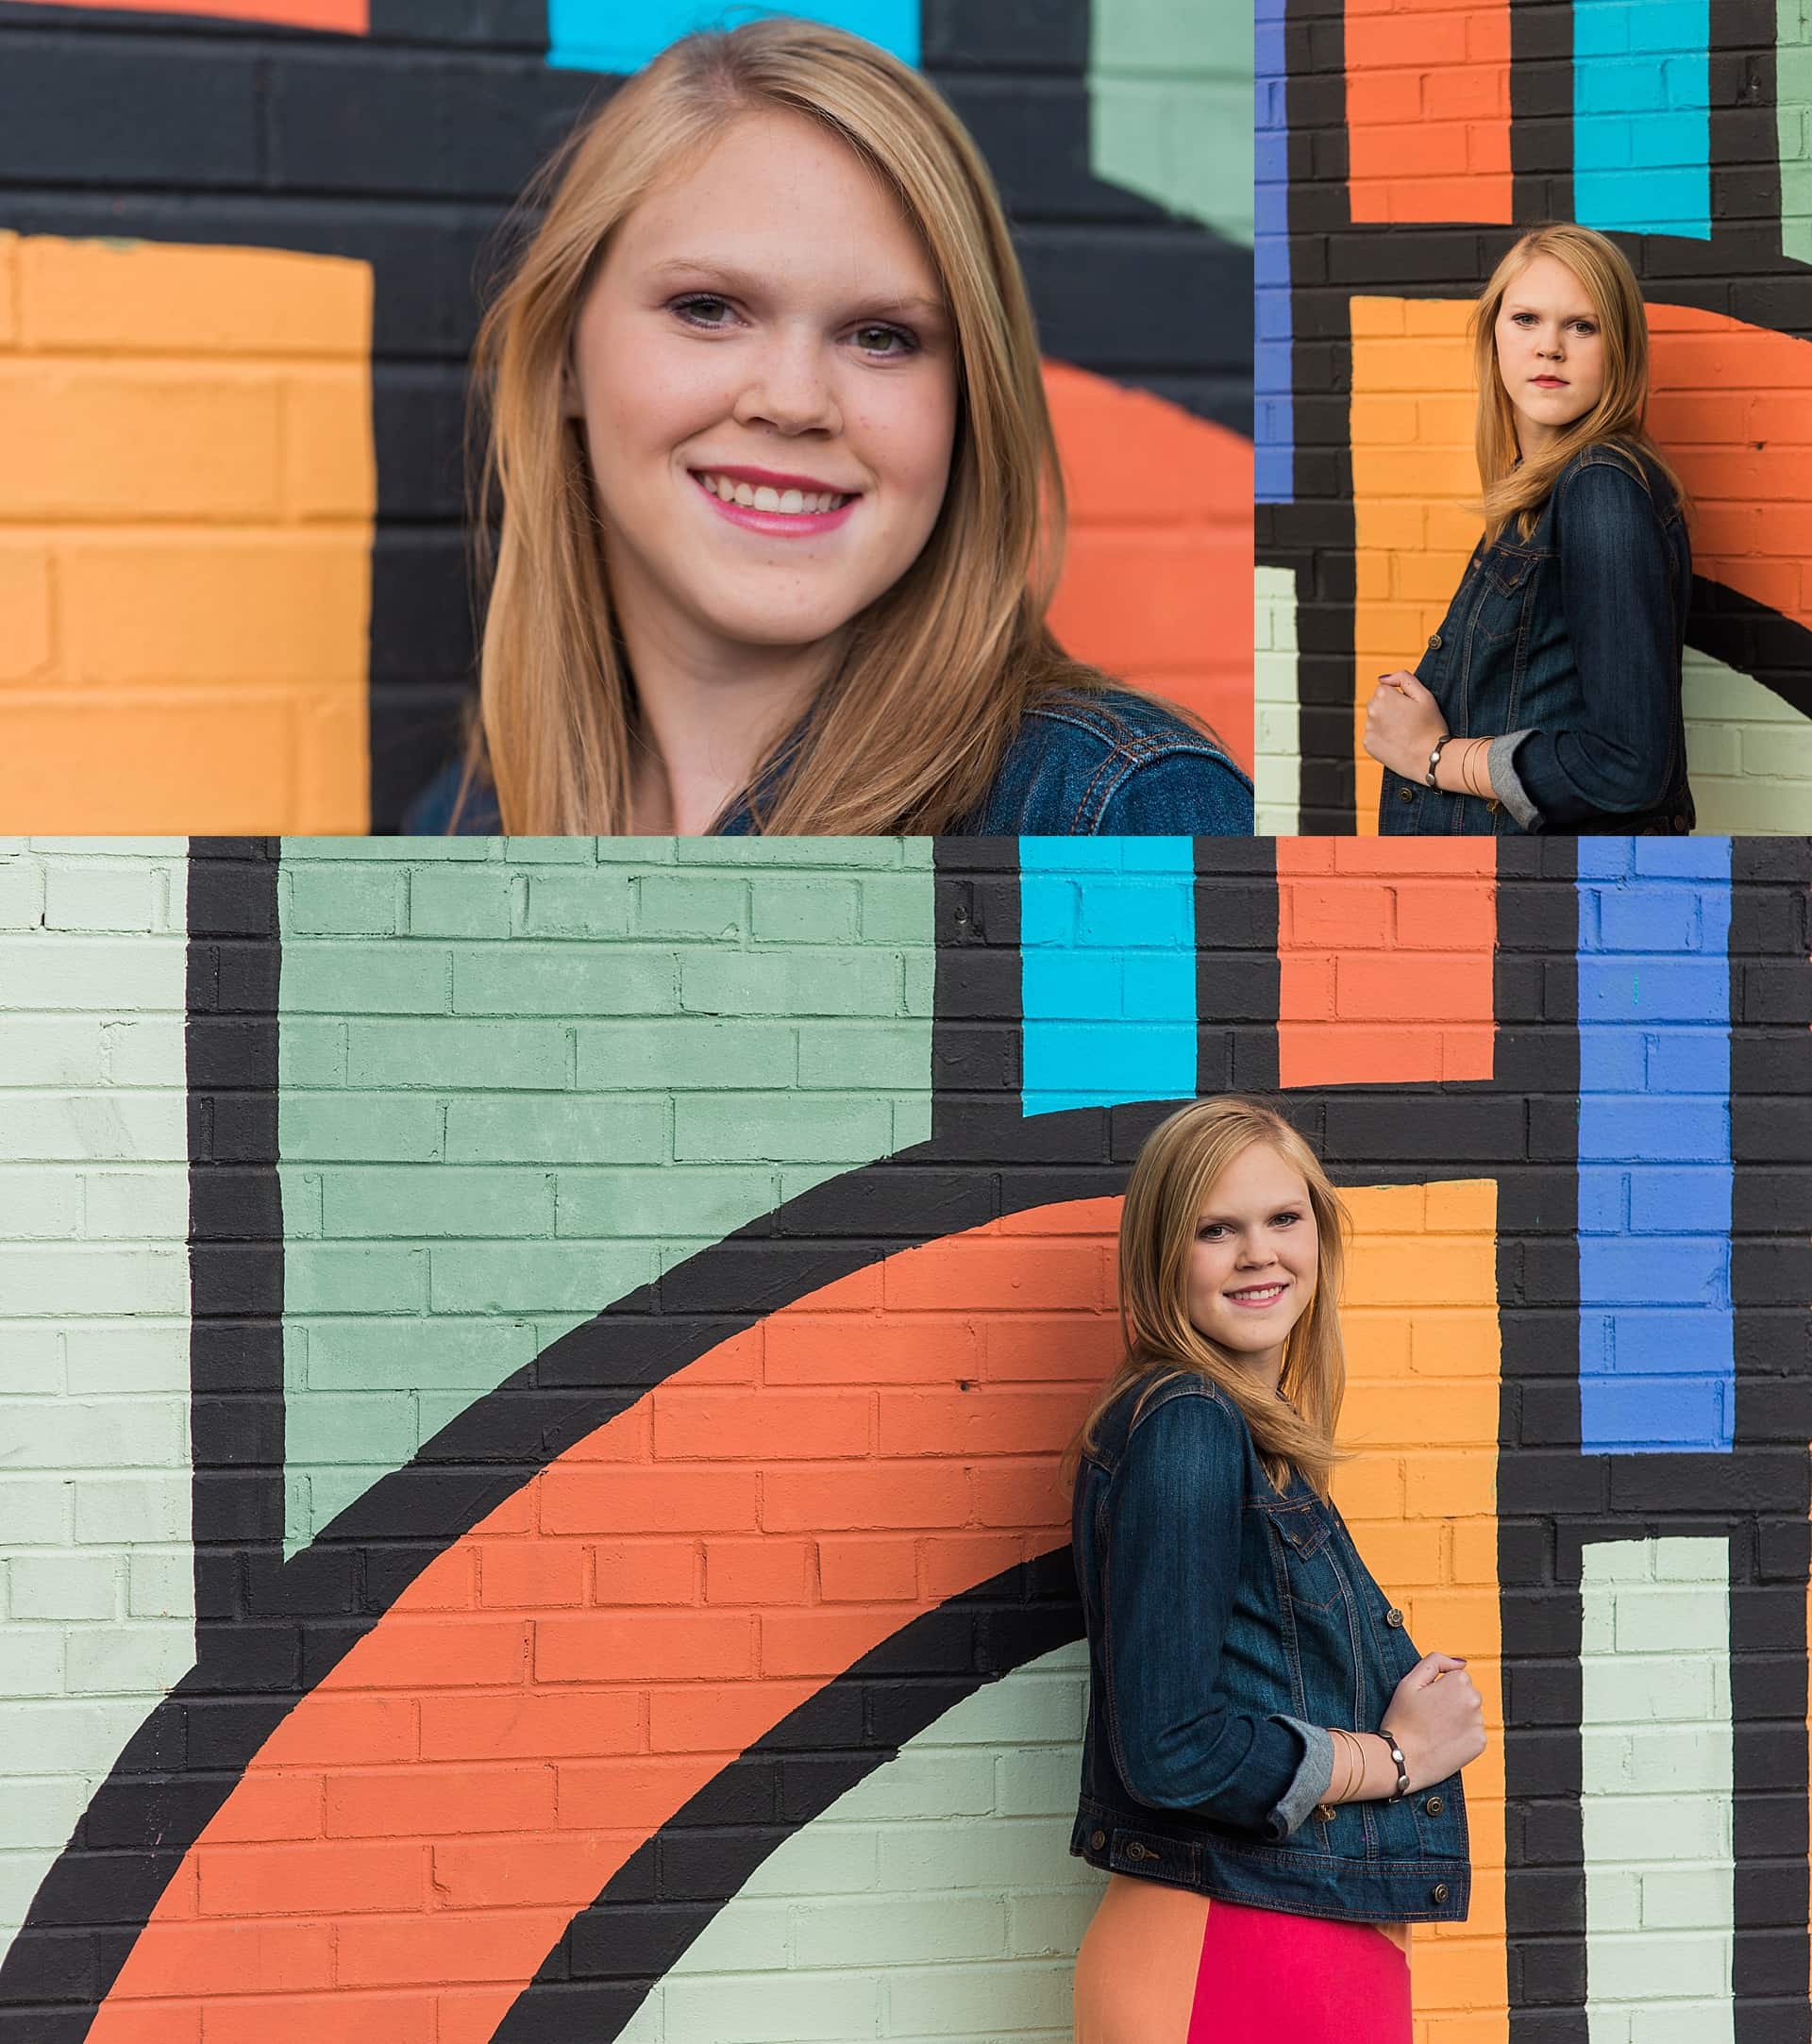 Senior pictures downtown Asheville in front of colorful brick wall